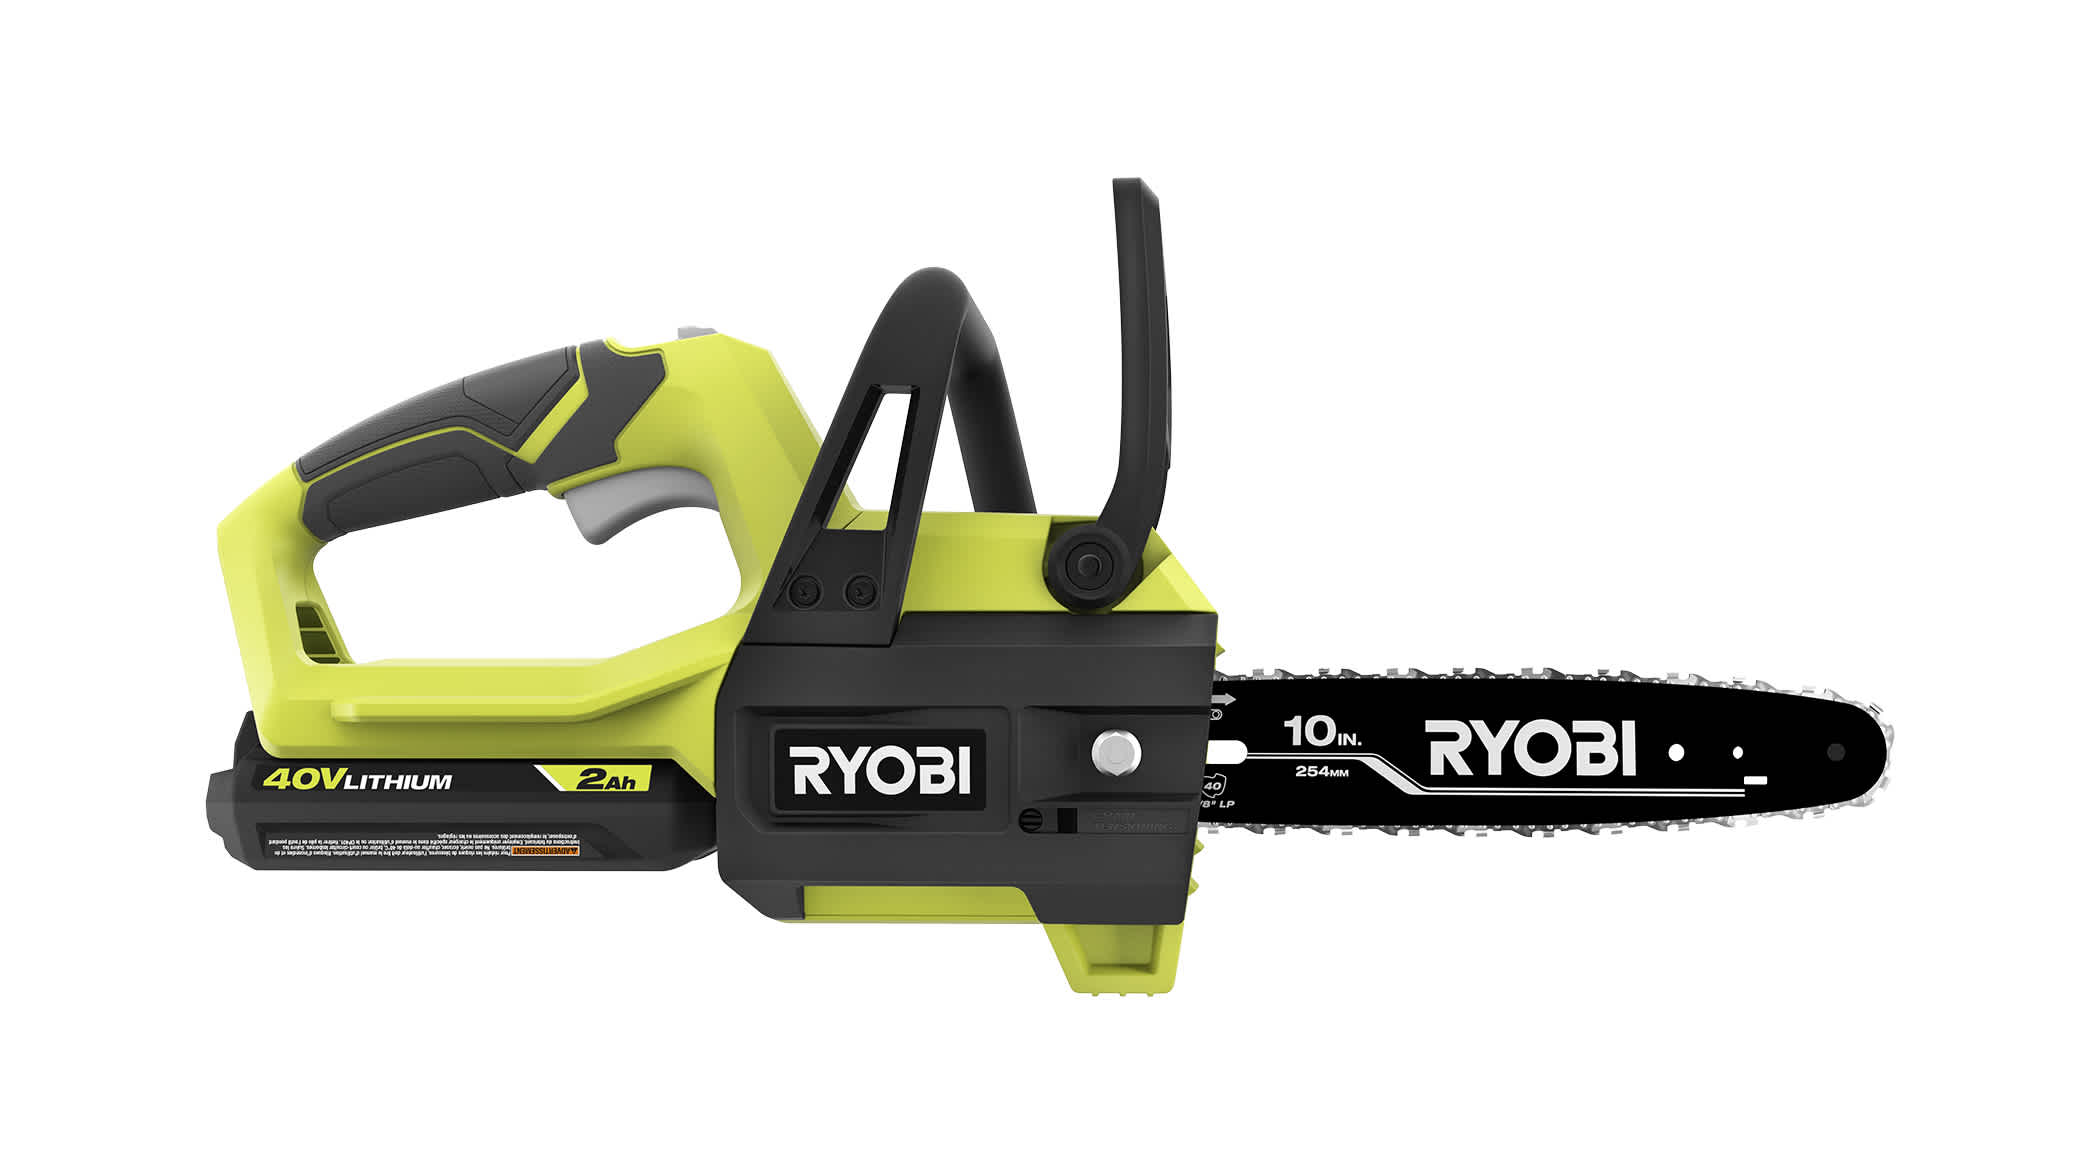 Product Features Image for RYOBI 40V 10" CHAINSAW (TOOL ONLY).